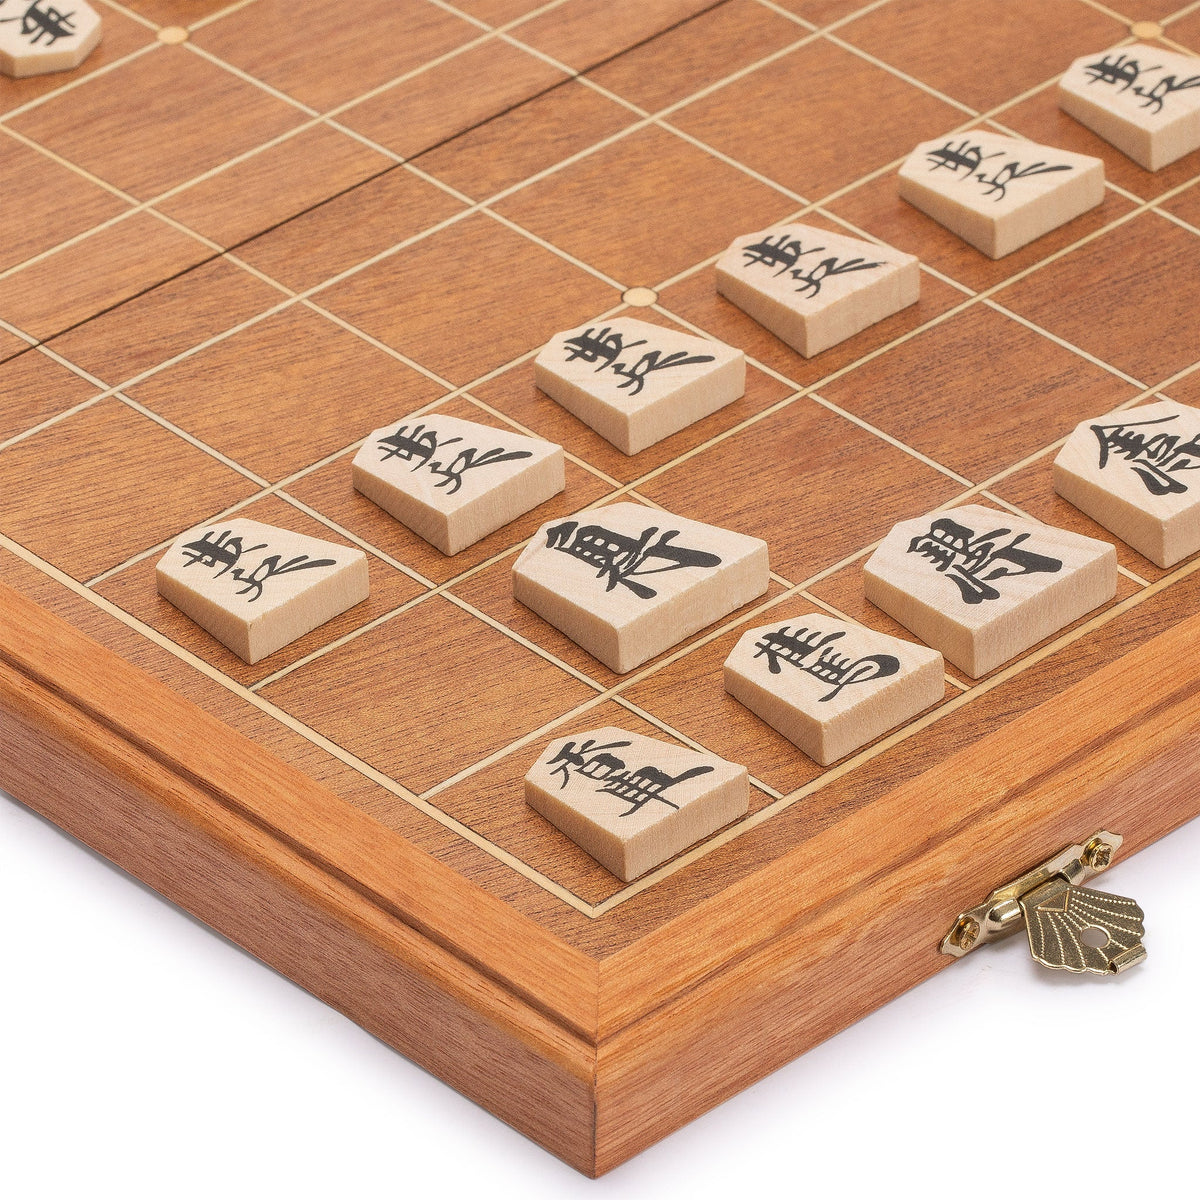 Shogi Japanese Chess Game Set - Wooden Table Board with Drawers and Tr –  Yellow Mountain Imports